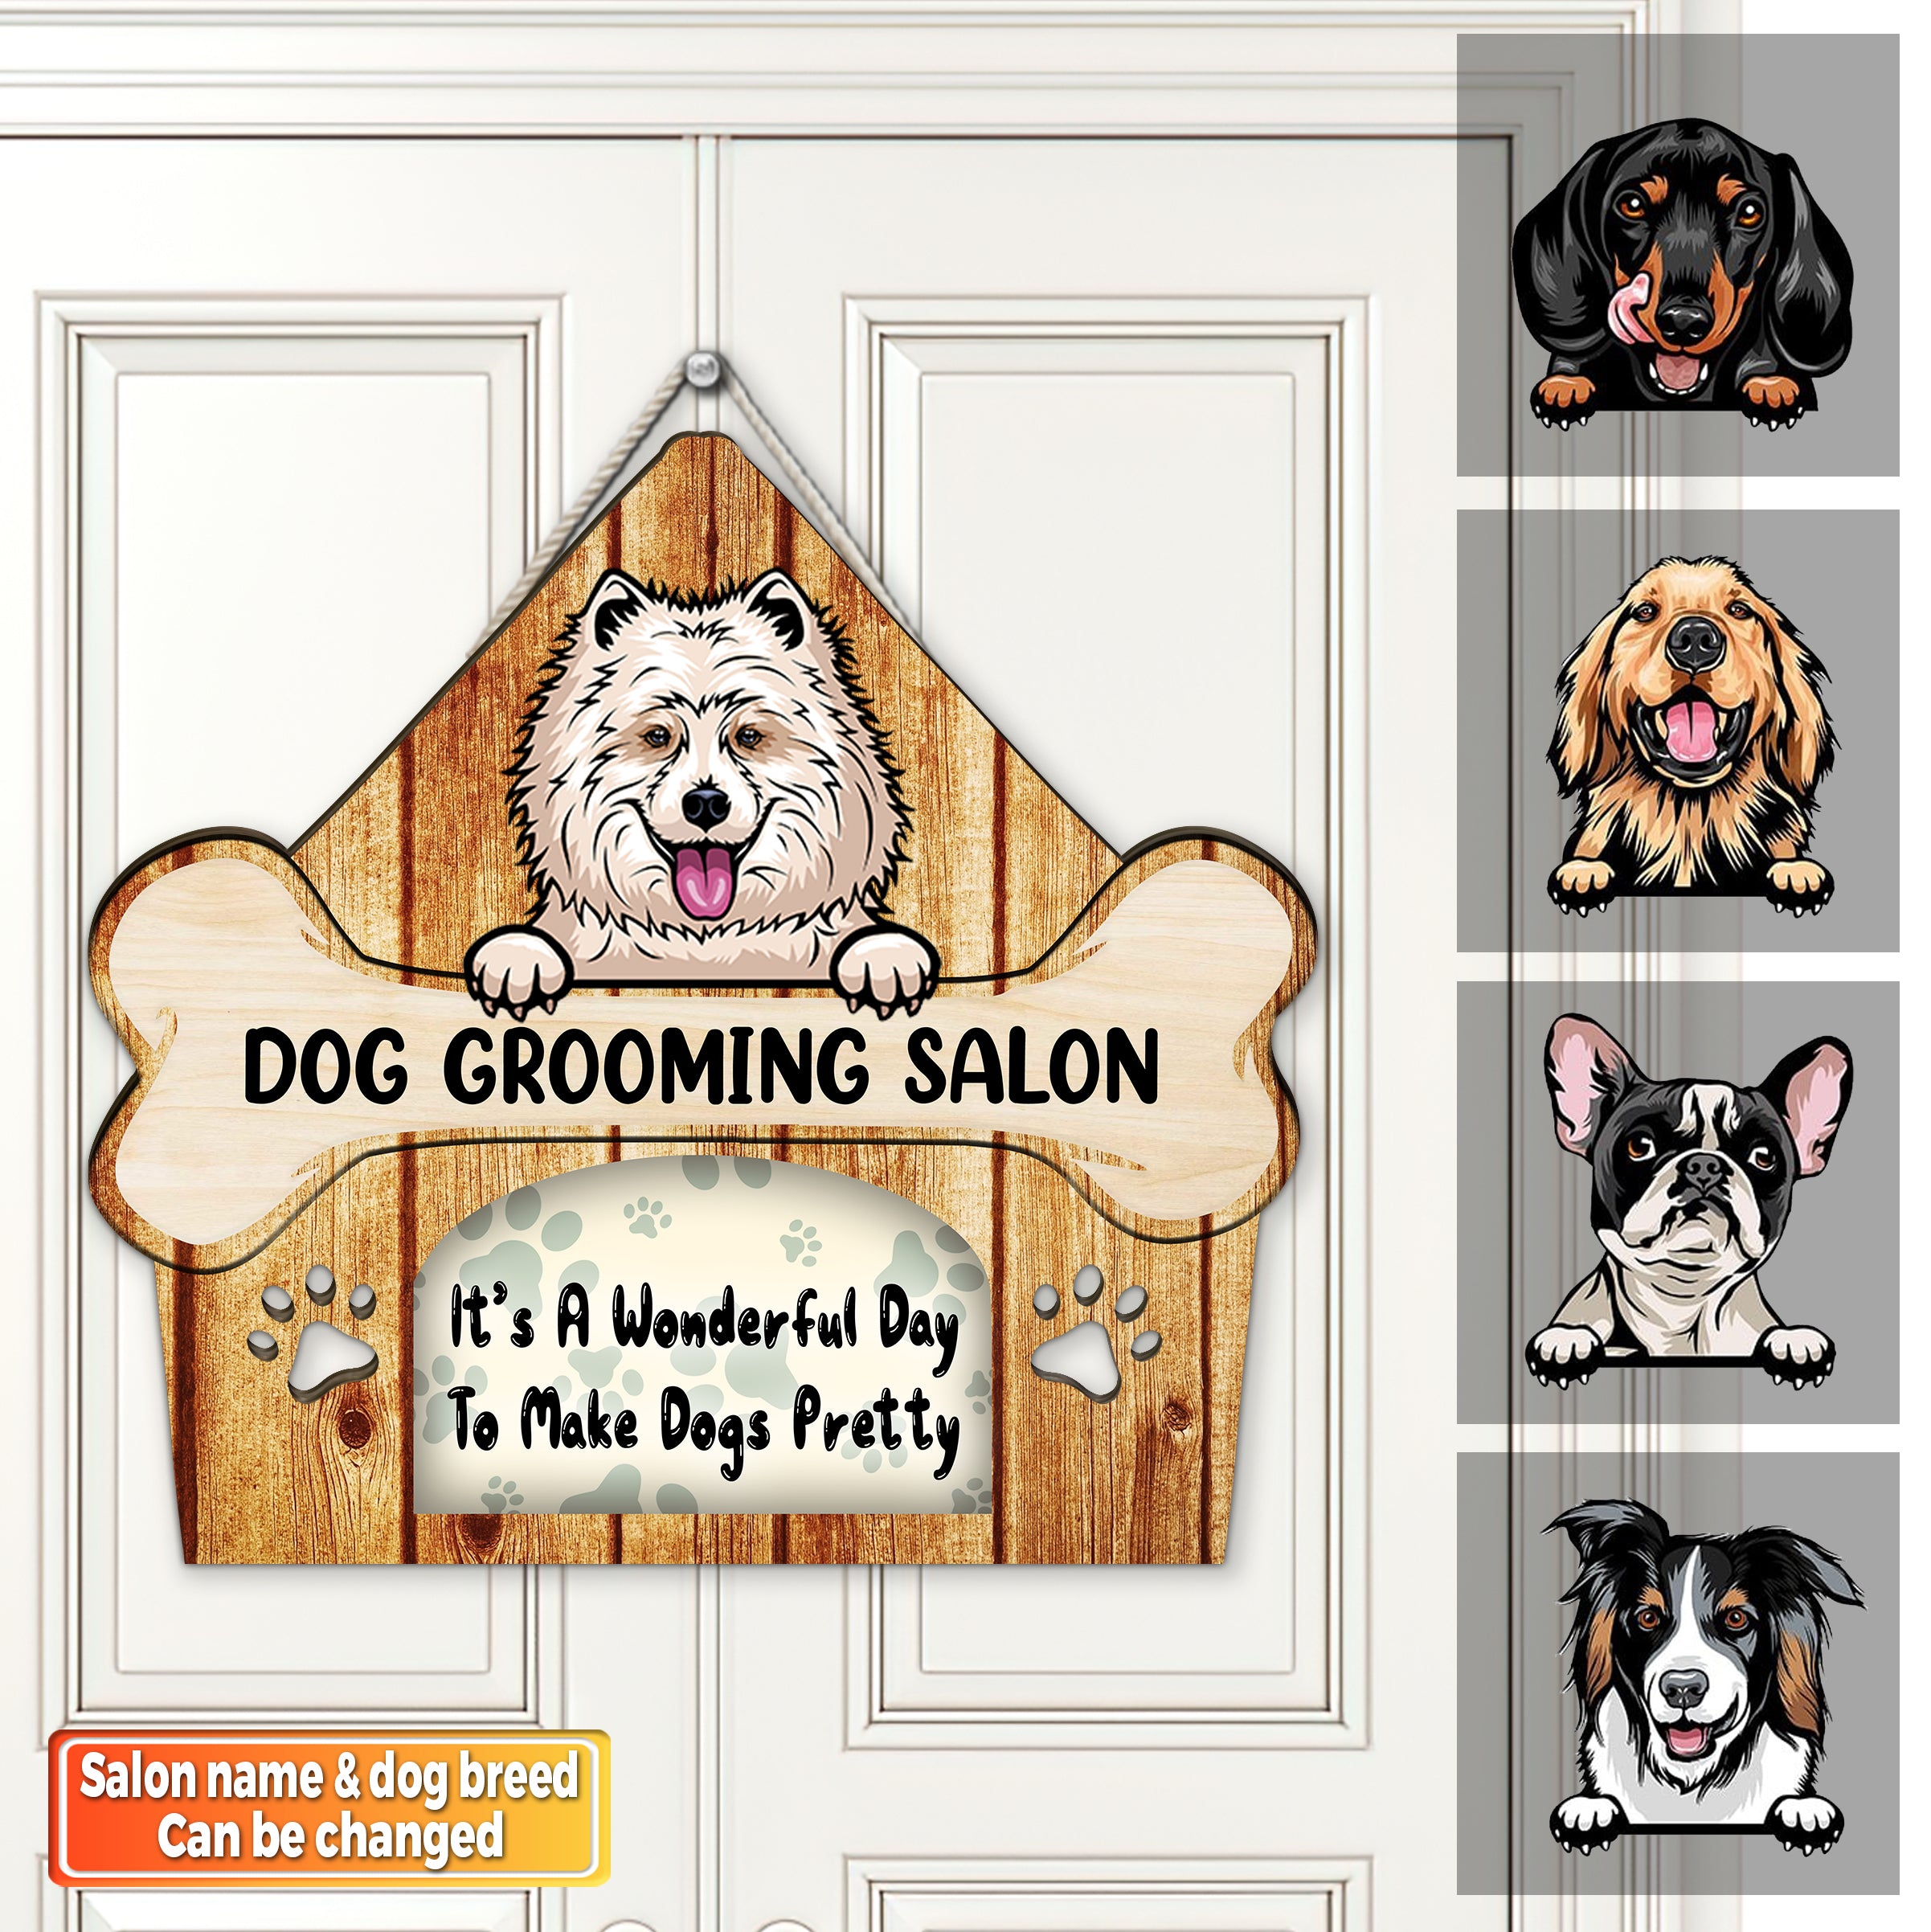 WELCOME TO DOG GROOMING SALON, IT’S A WONDERFUL DAY, TO MAKE DOGS PRETTY - CUSTOM SHAPED WOODEN SIGN